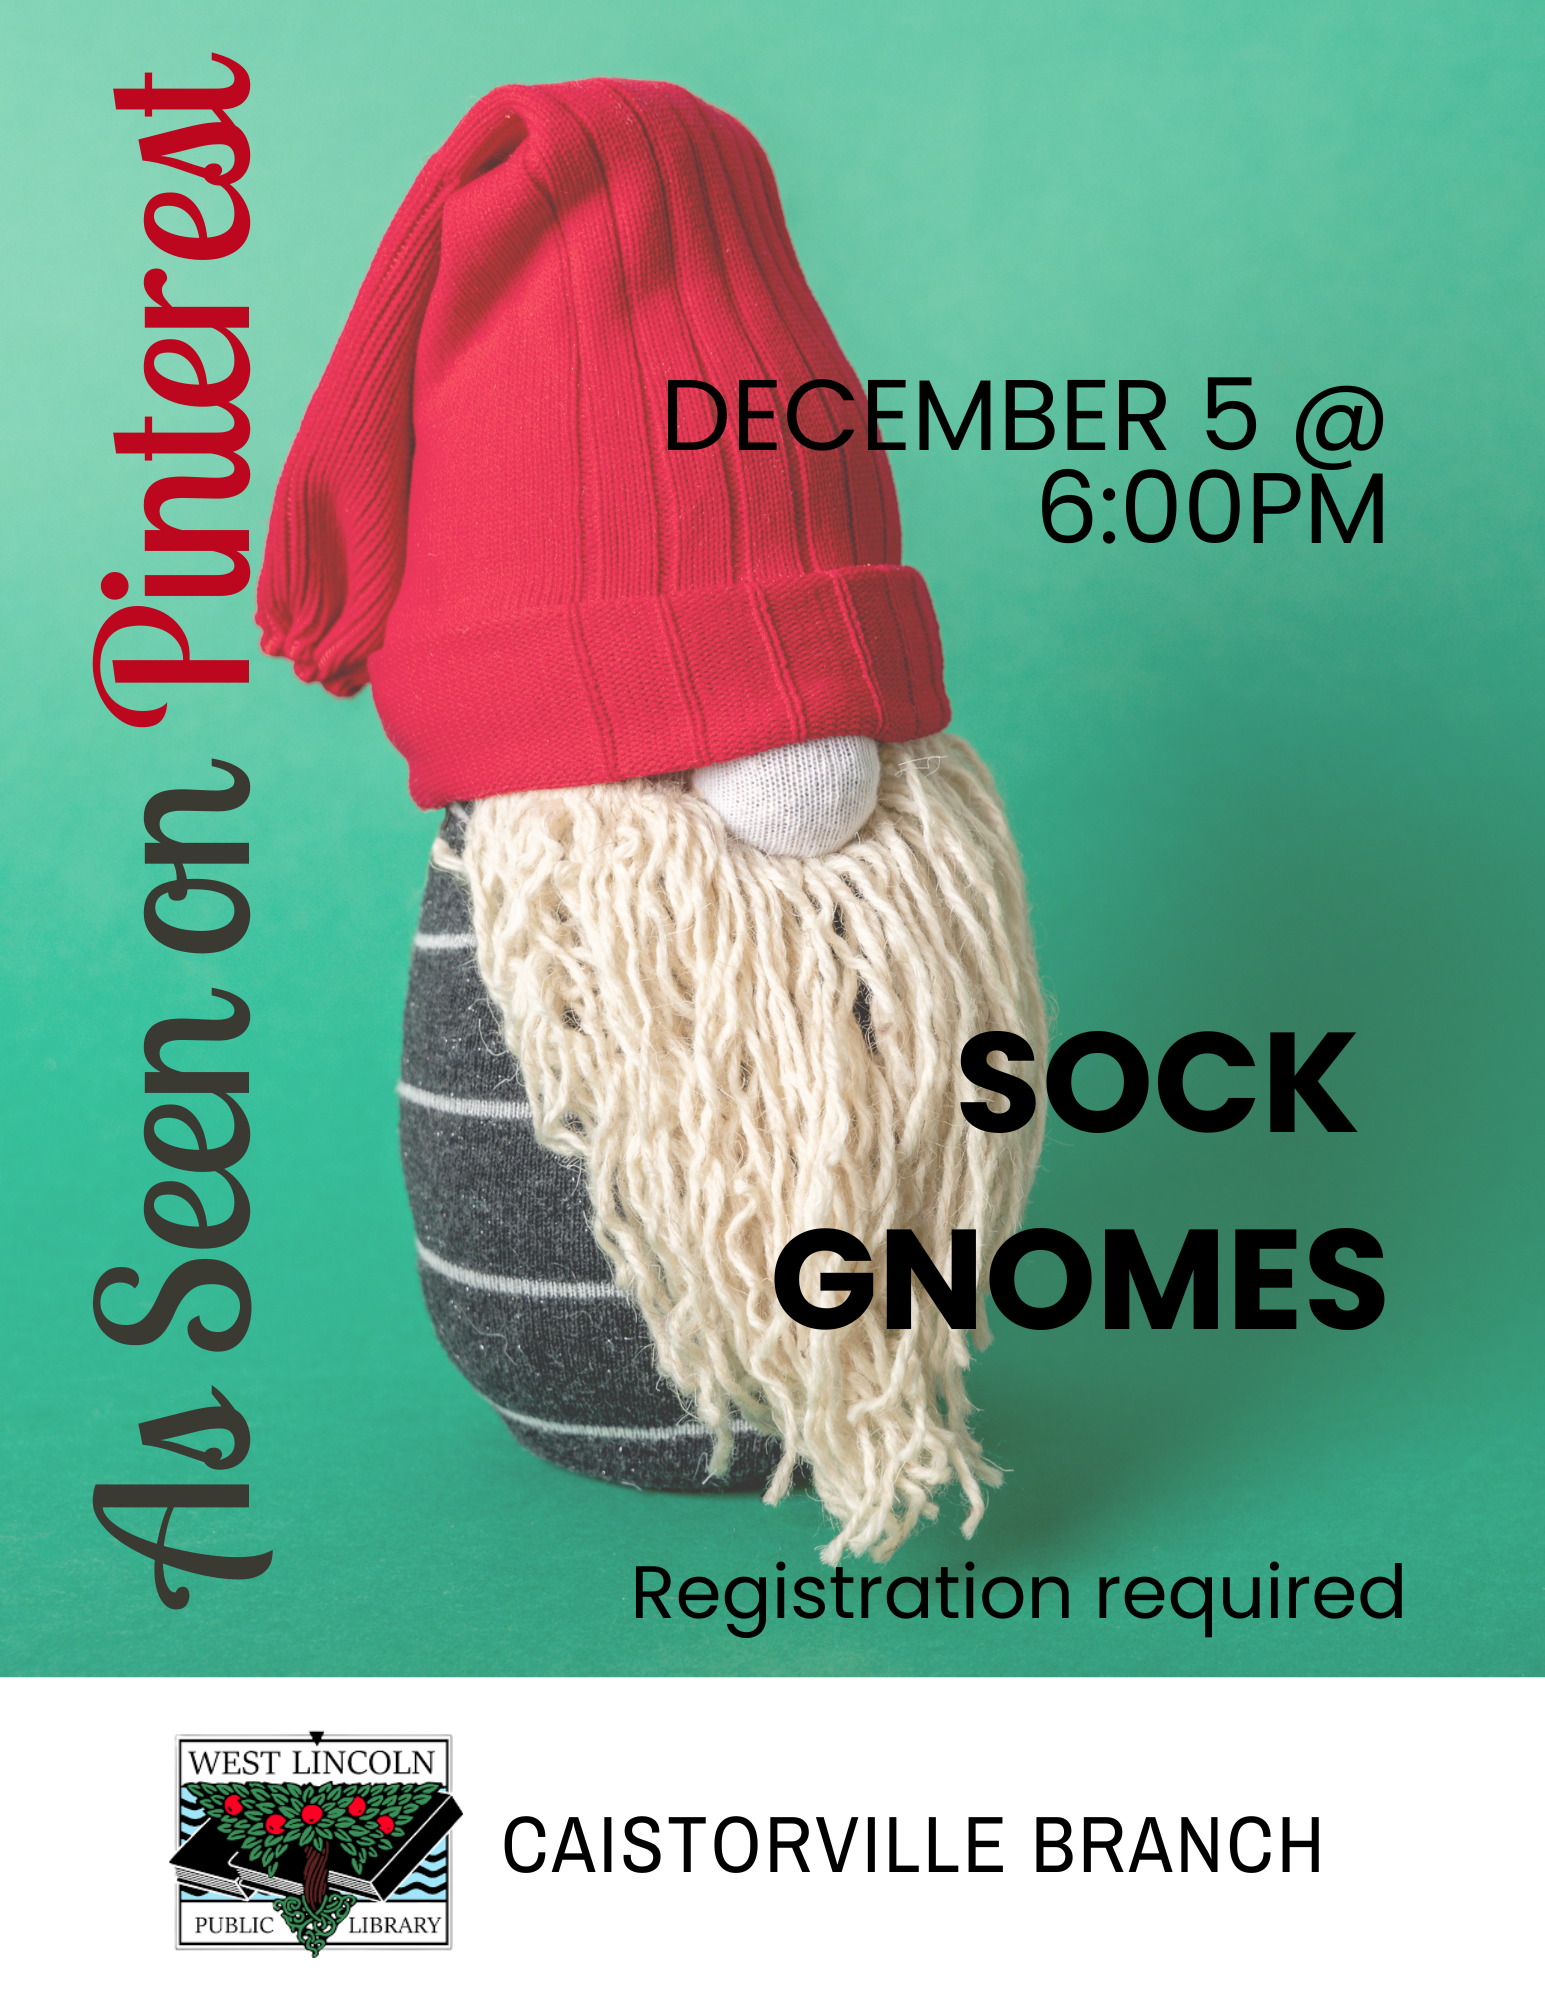 Poster of As Seen on Pintererst, Sock gnomes, registration required. December 5 at 6:00pm, Caistorville Branch